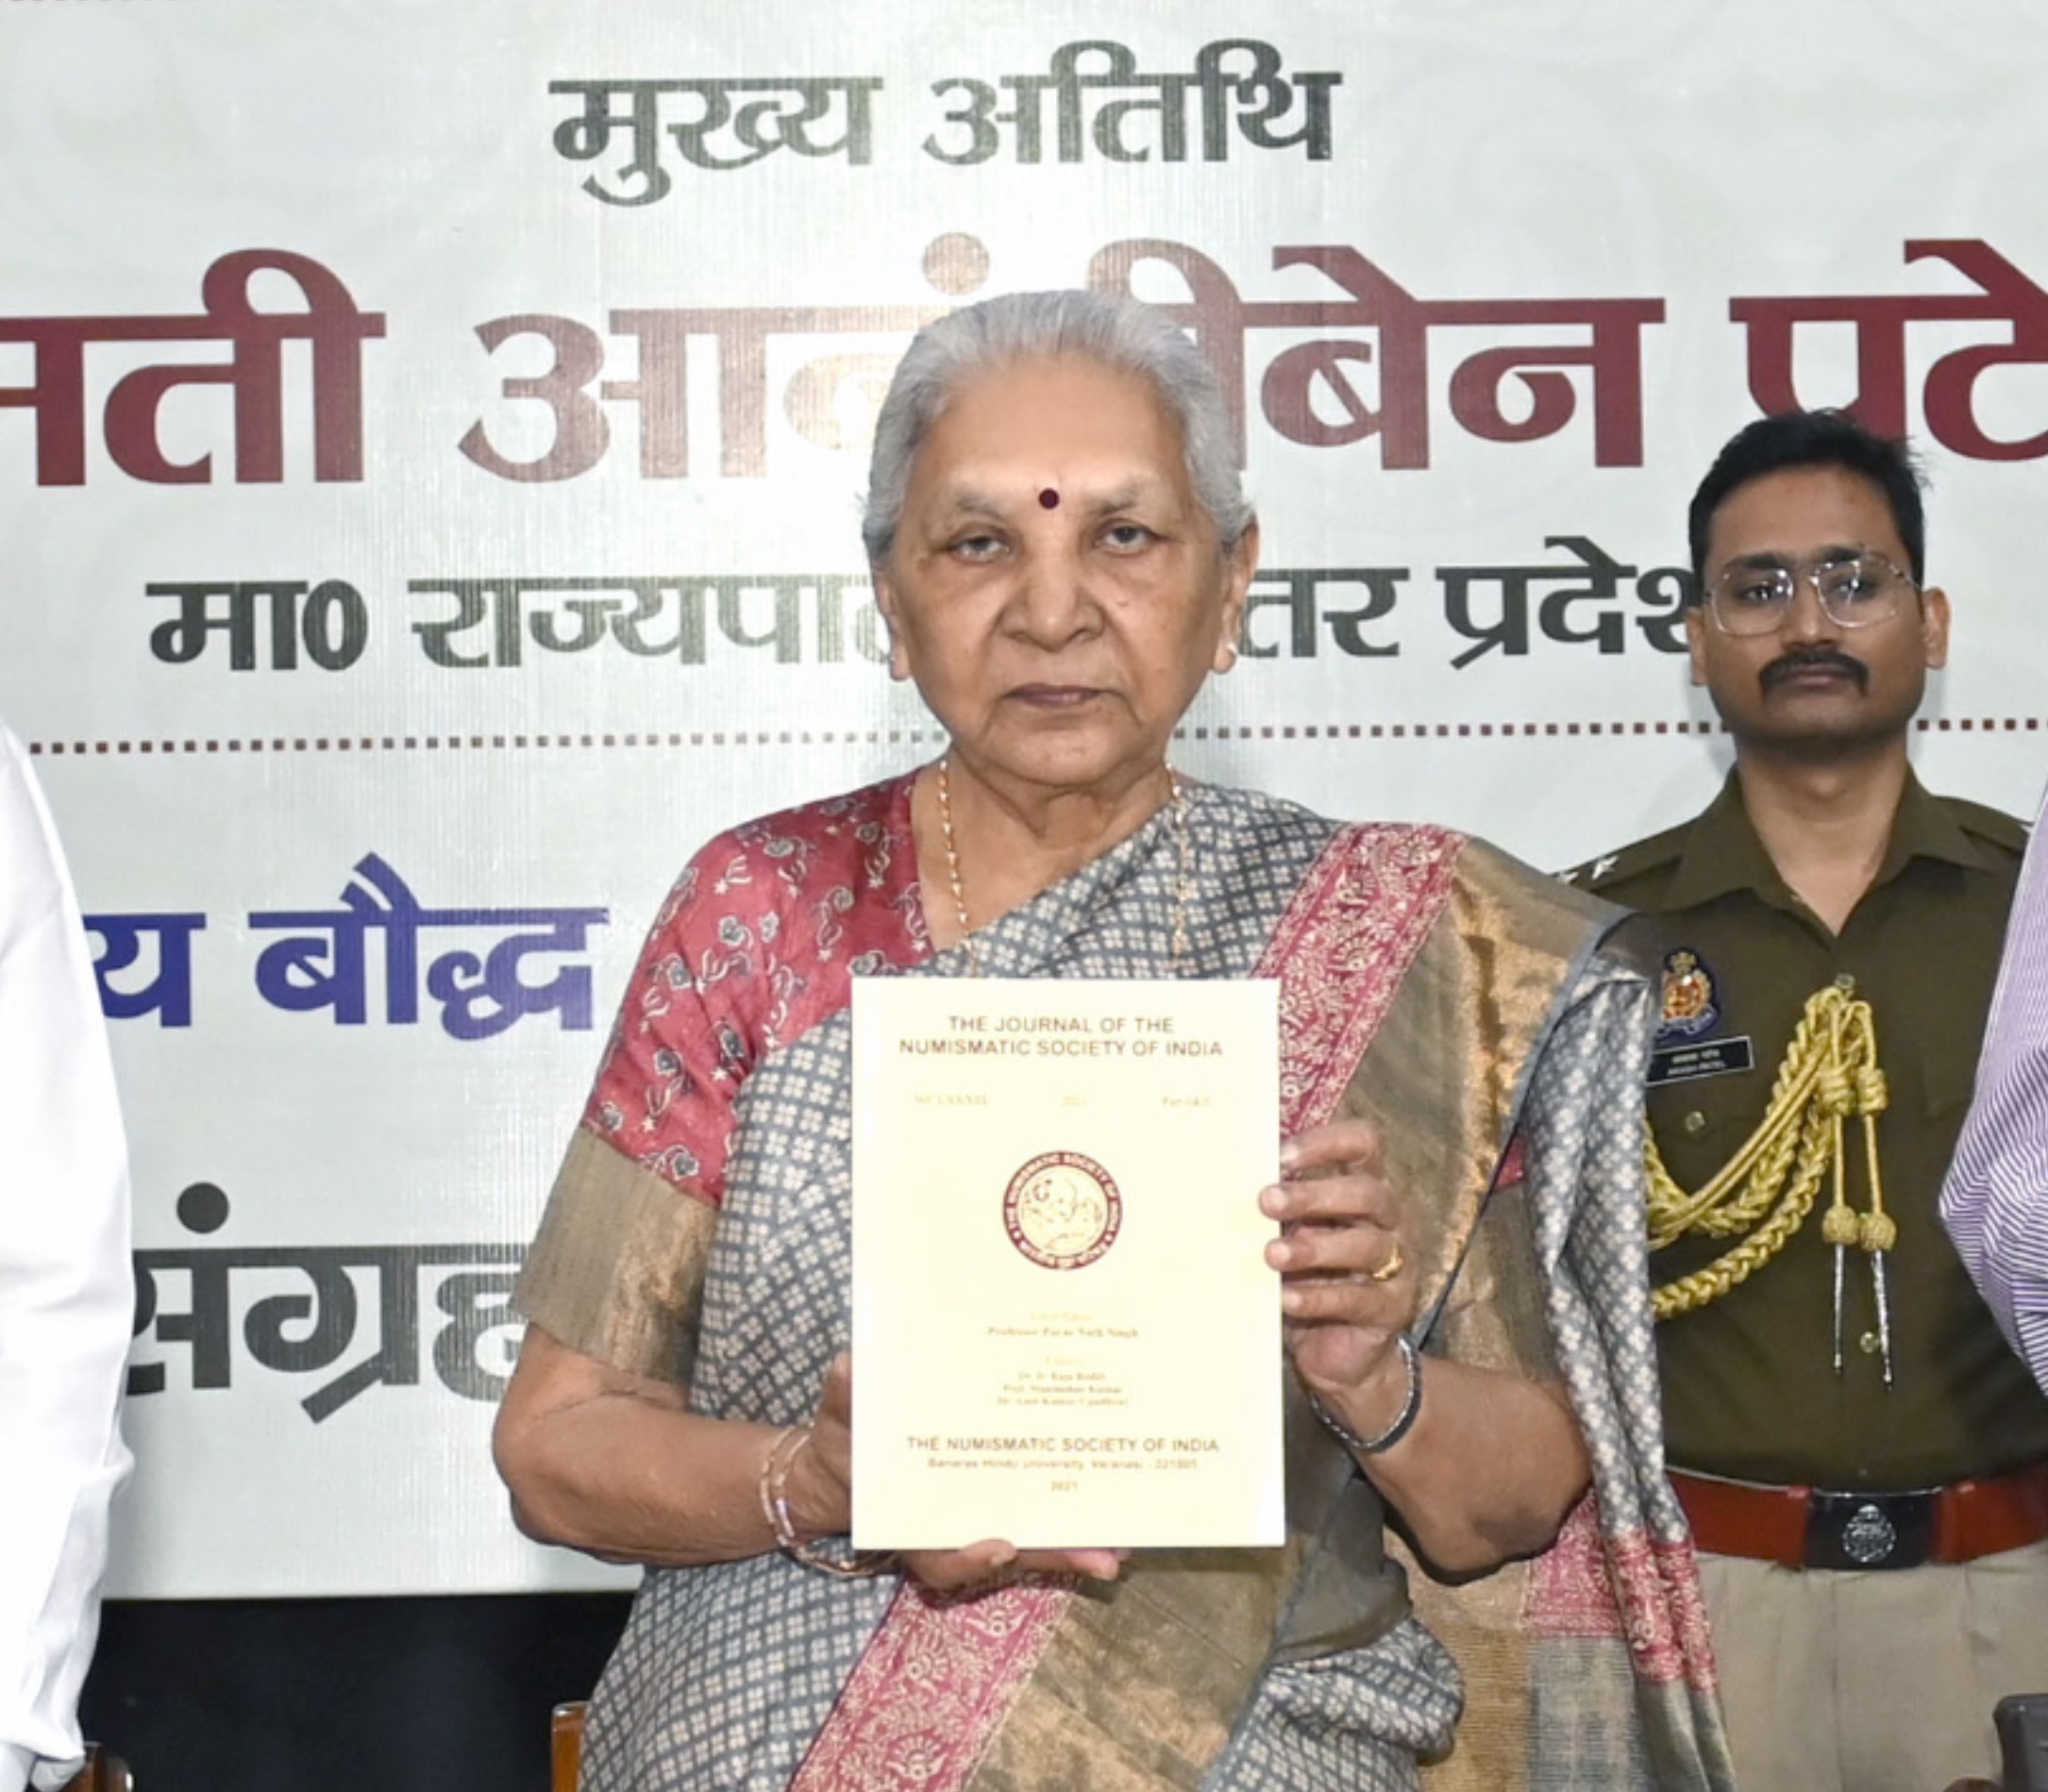 The Governor inaugurated the 104th Annual Conference of the Bhartiya Mudra Parishad